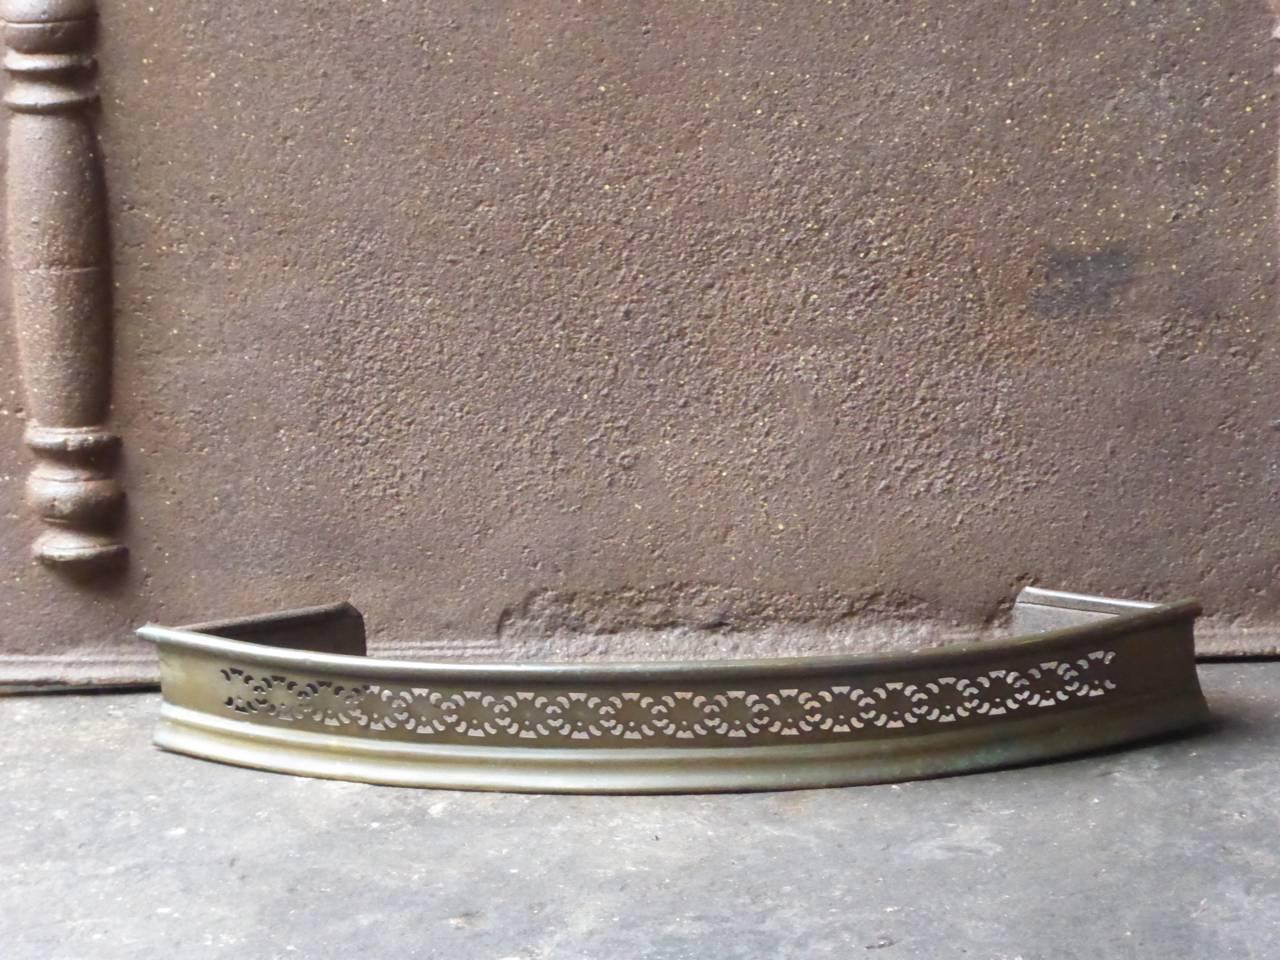 19th century English fireplace fender made of brass and iron.

We have a unique and specialized collection of antique and used fireplace accessories consisting of more than 1000 listings at 1stdibs. Amongst others, we always have 300+ firebacks,